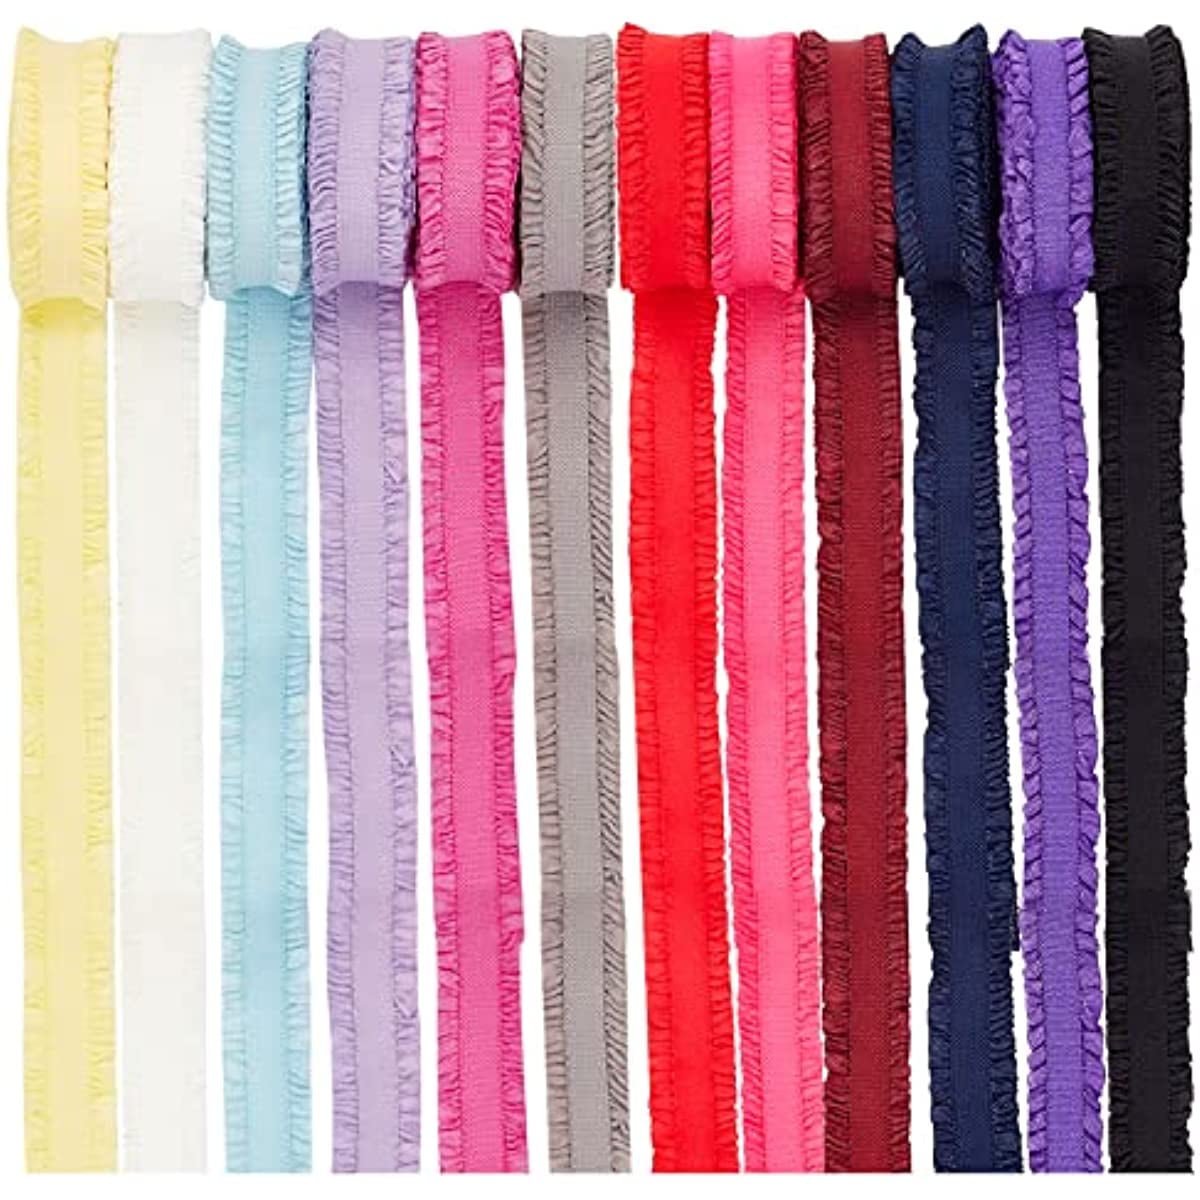 6Yards 37mm Wide Non-Slip Elastic Band Straight Silicone Elastic